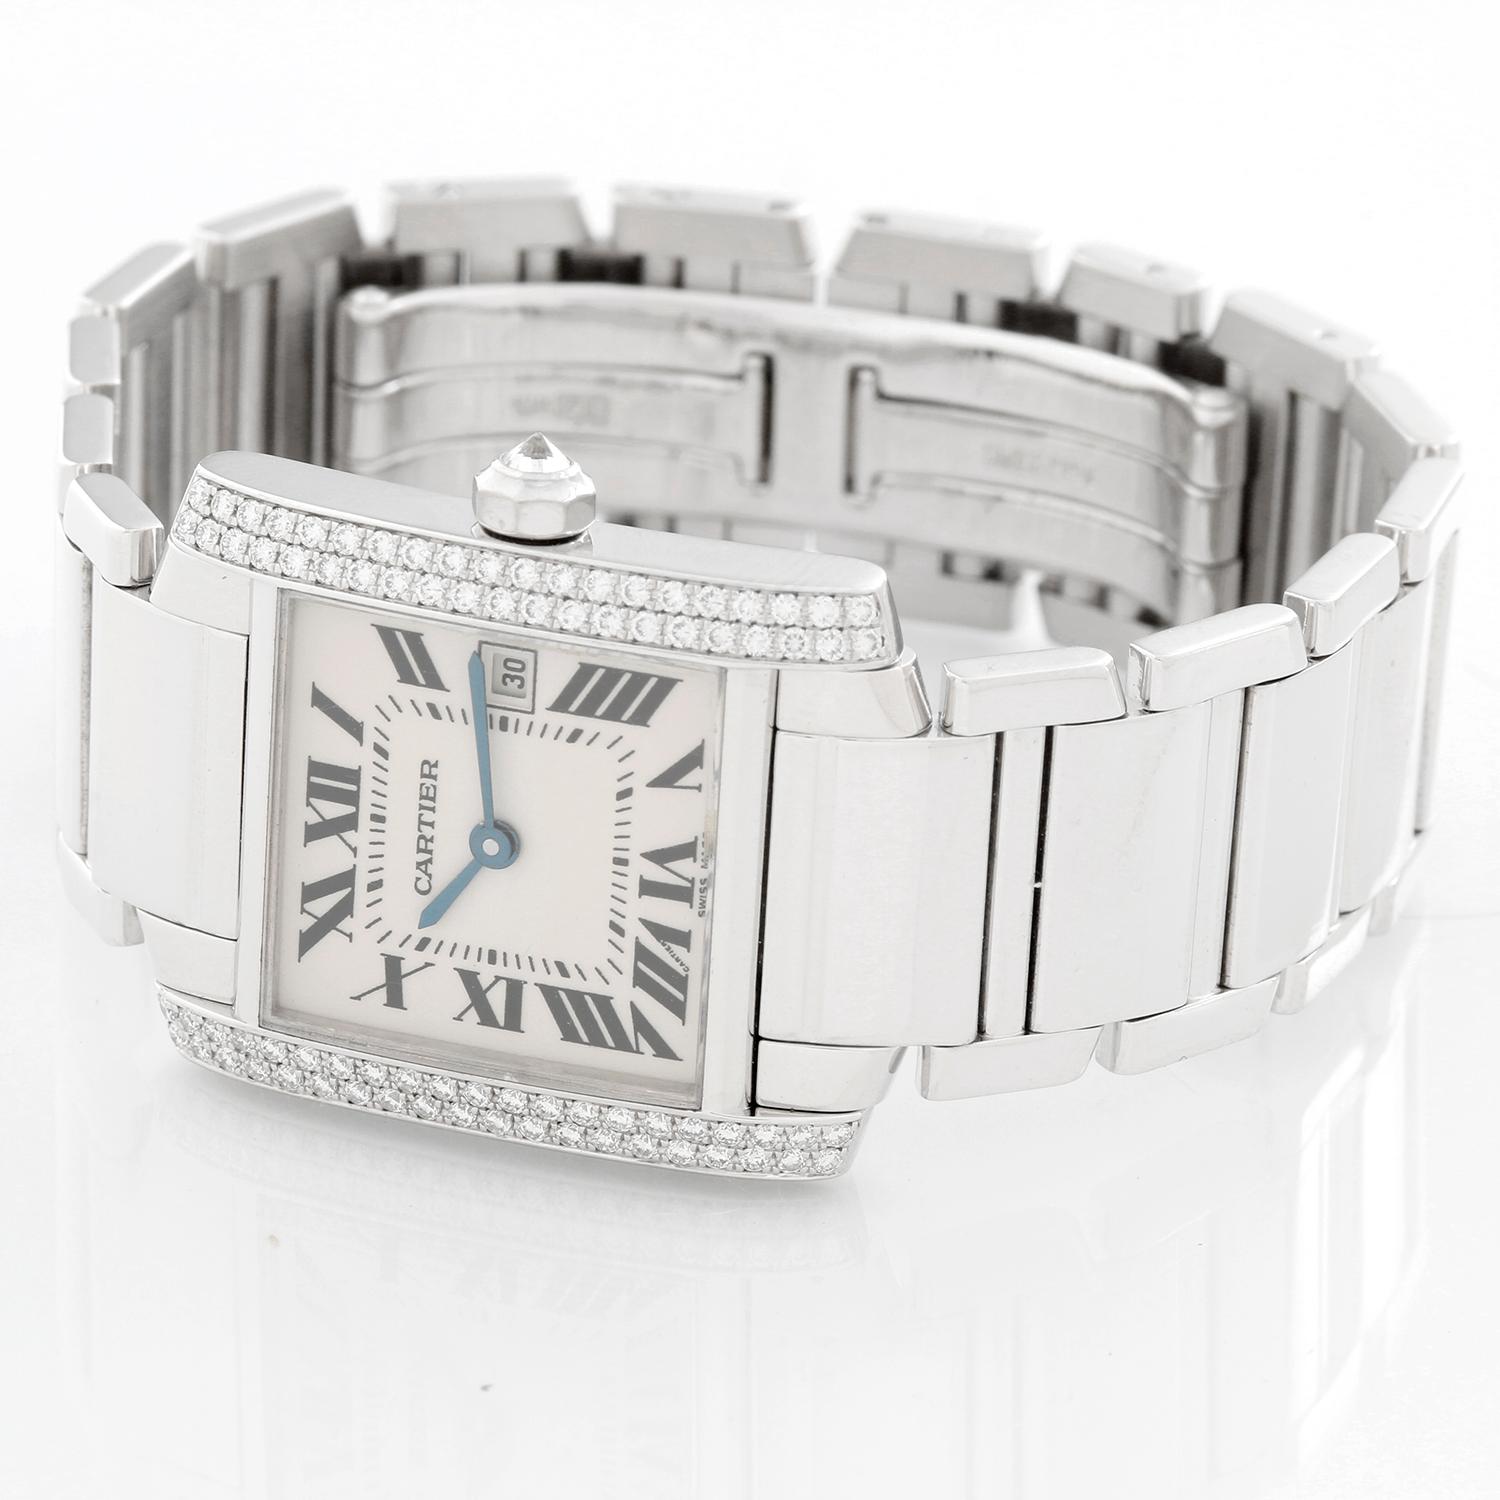 Cartier Tank Francaise 18k White Gold Midsize Diamond Watch WE101851 - Quartz. 18k white gold  case with 2 rows of factory diamonds on either side  (25mm x 30mm). White dial with black Roman numerals; date at 3 o'clock. 18k White gold Cartier